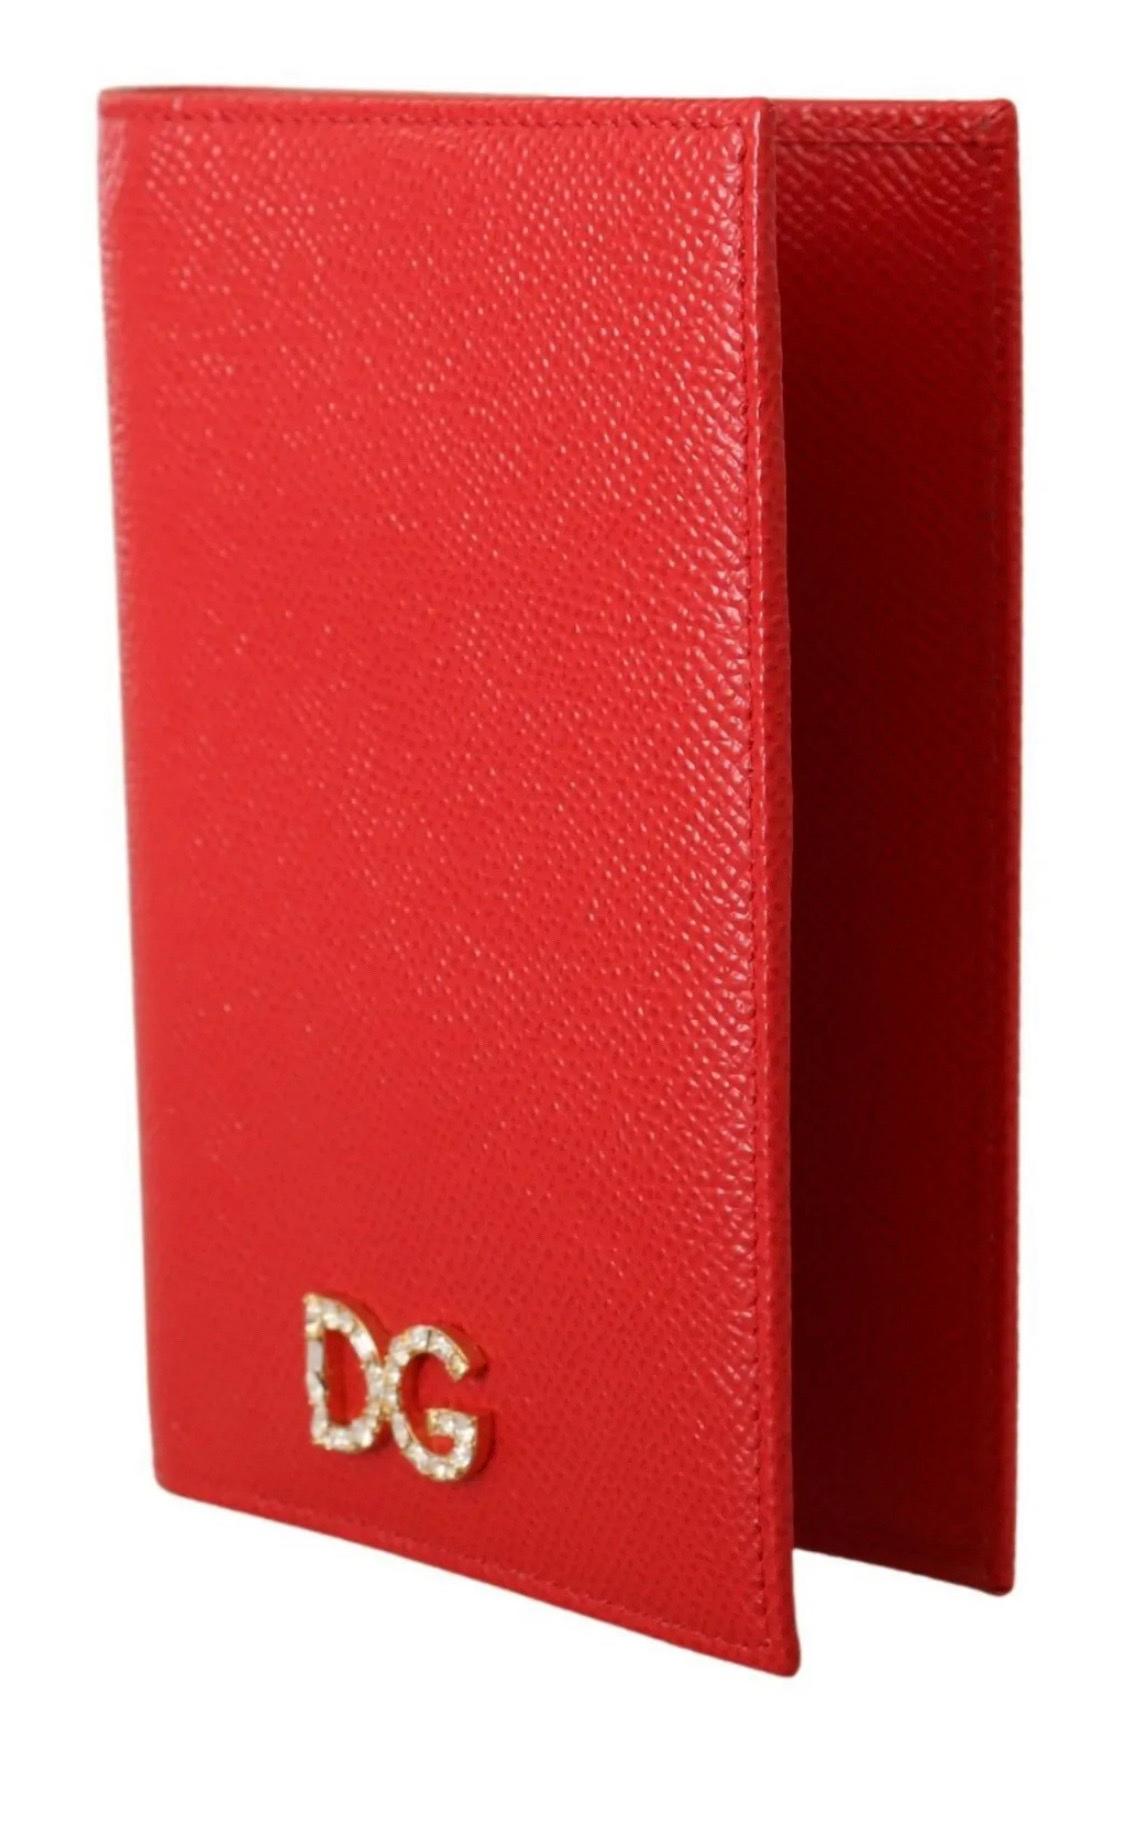 DOLCE & GABBANA

Gorgeous brand new with tags, 100% Authentic Dolce & Gabbana leather bifold wallet with DG crystals features a card slot holder.

Model: Bifold wallet
Material: 100% Leather
Color: Red
Clear crystals
Made in Italy

Measurements: